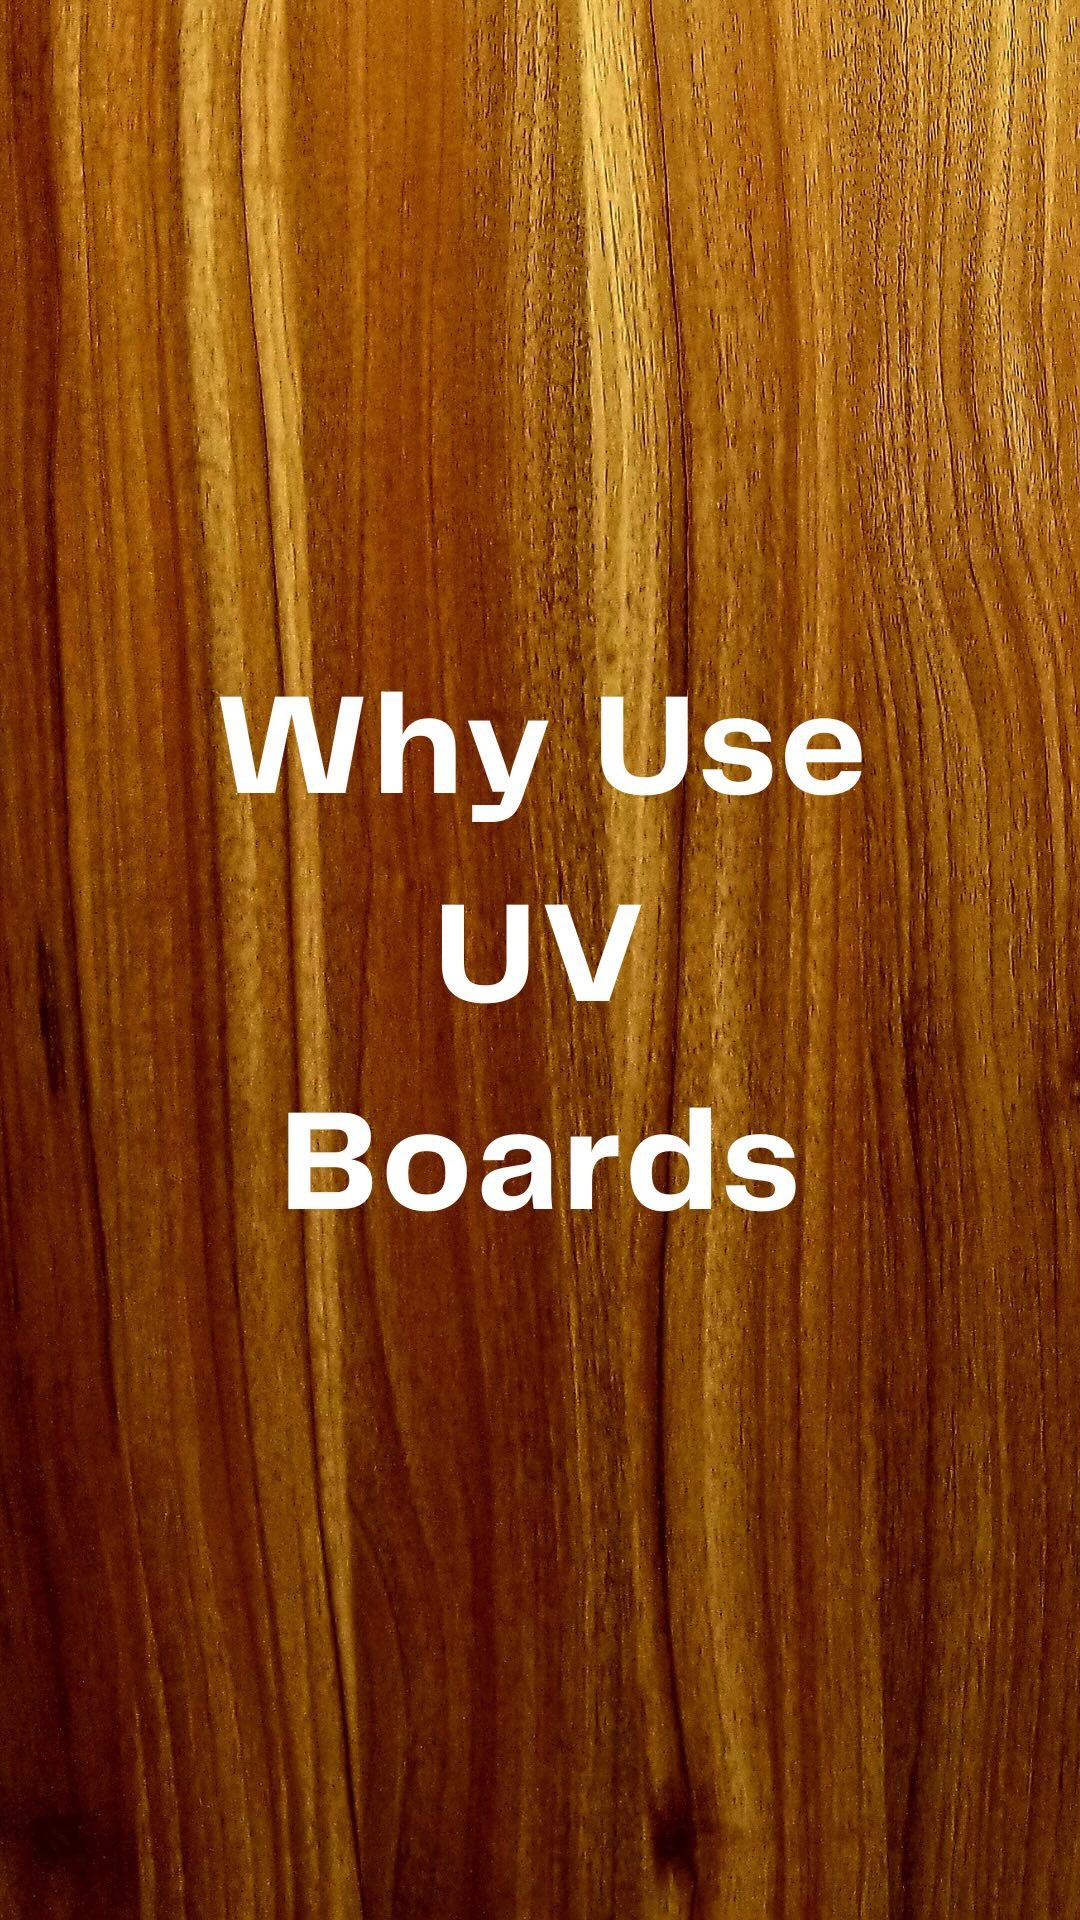 The UV Boards are of 1200 x 2400mm size. Multiple types of Wood Finish and Solid Finish Colours are available.
Our products are:
- Make in India
Handcrafted in India
DM us or call to order now!
-
#uvboards #flexistone #stoneboards #interiordesign #exteriordesign #stonepanels #architecturedesign #architect #interiordesigners #homedecor
#colorantboards #diypanels #cladding #facade #ceilit #Greenapplegroupofcompanies #iiid #stoneworksindia #stonework #concretesheets #concreteindia #concretedesign #concreteconstruction